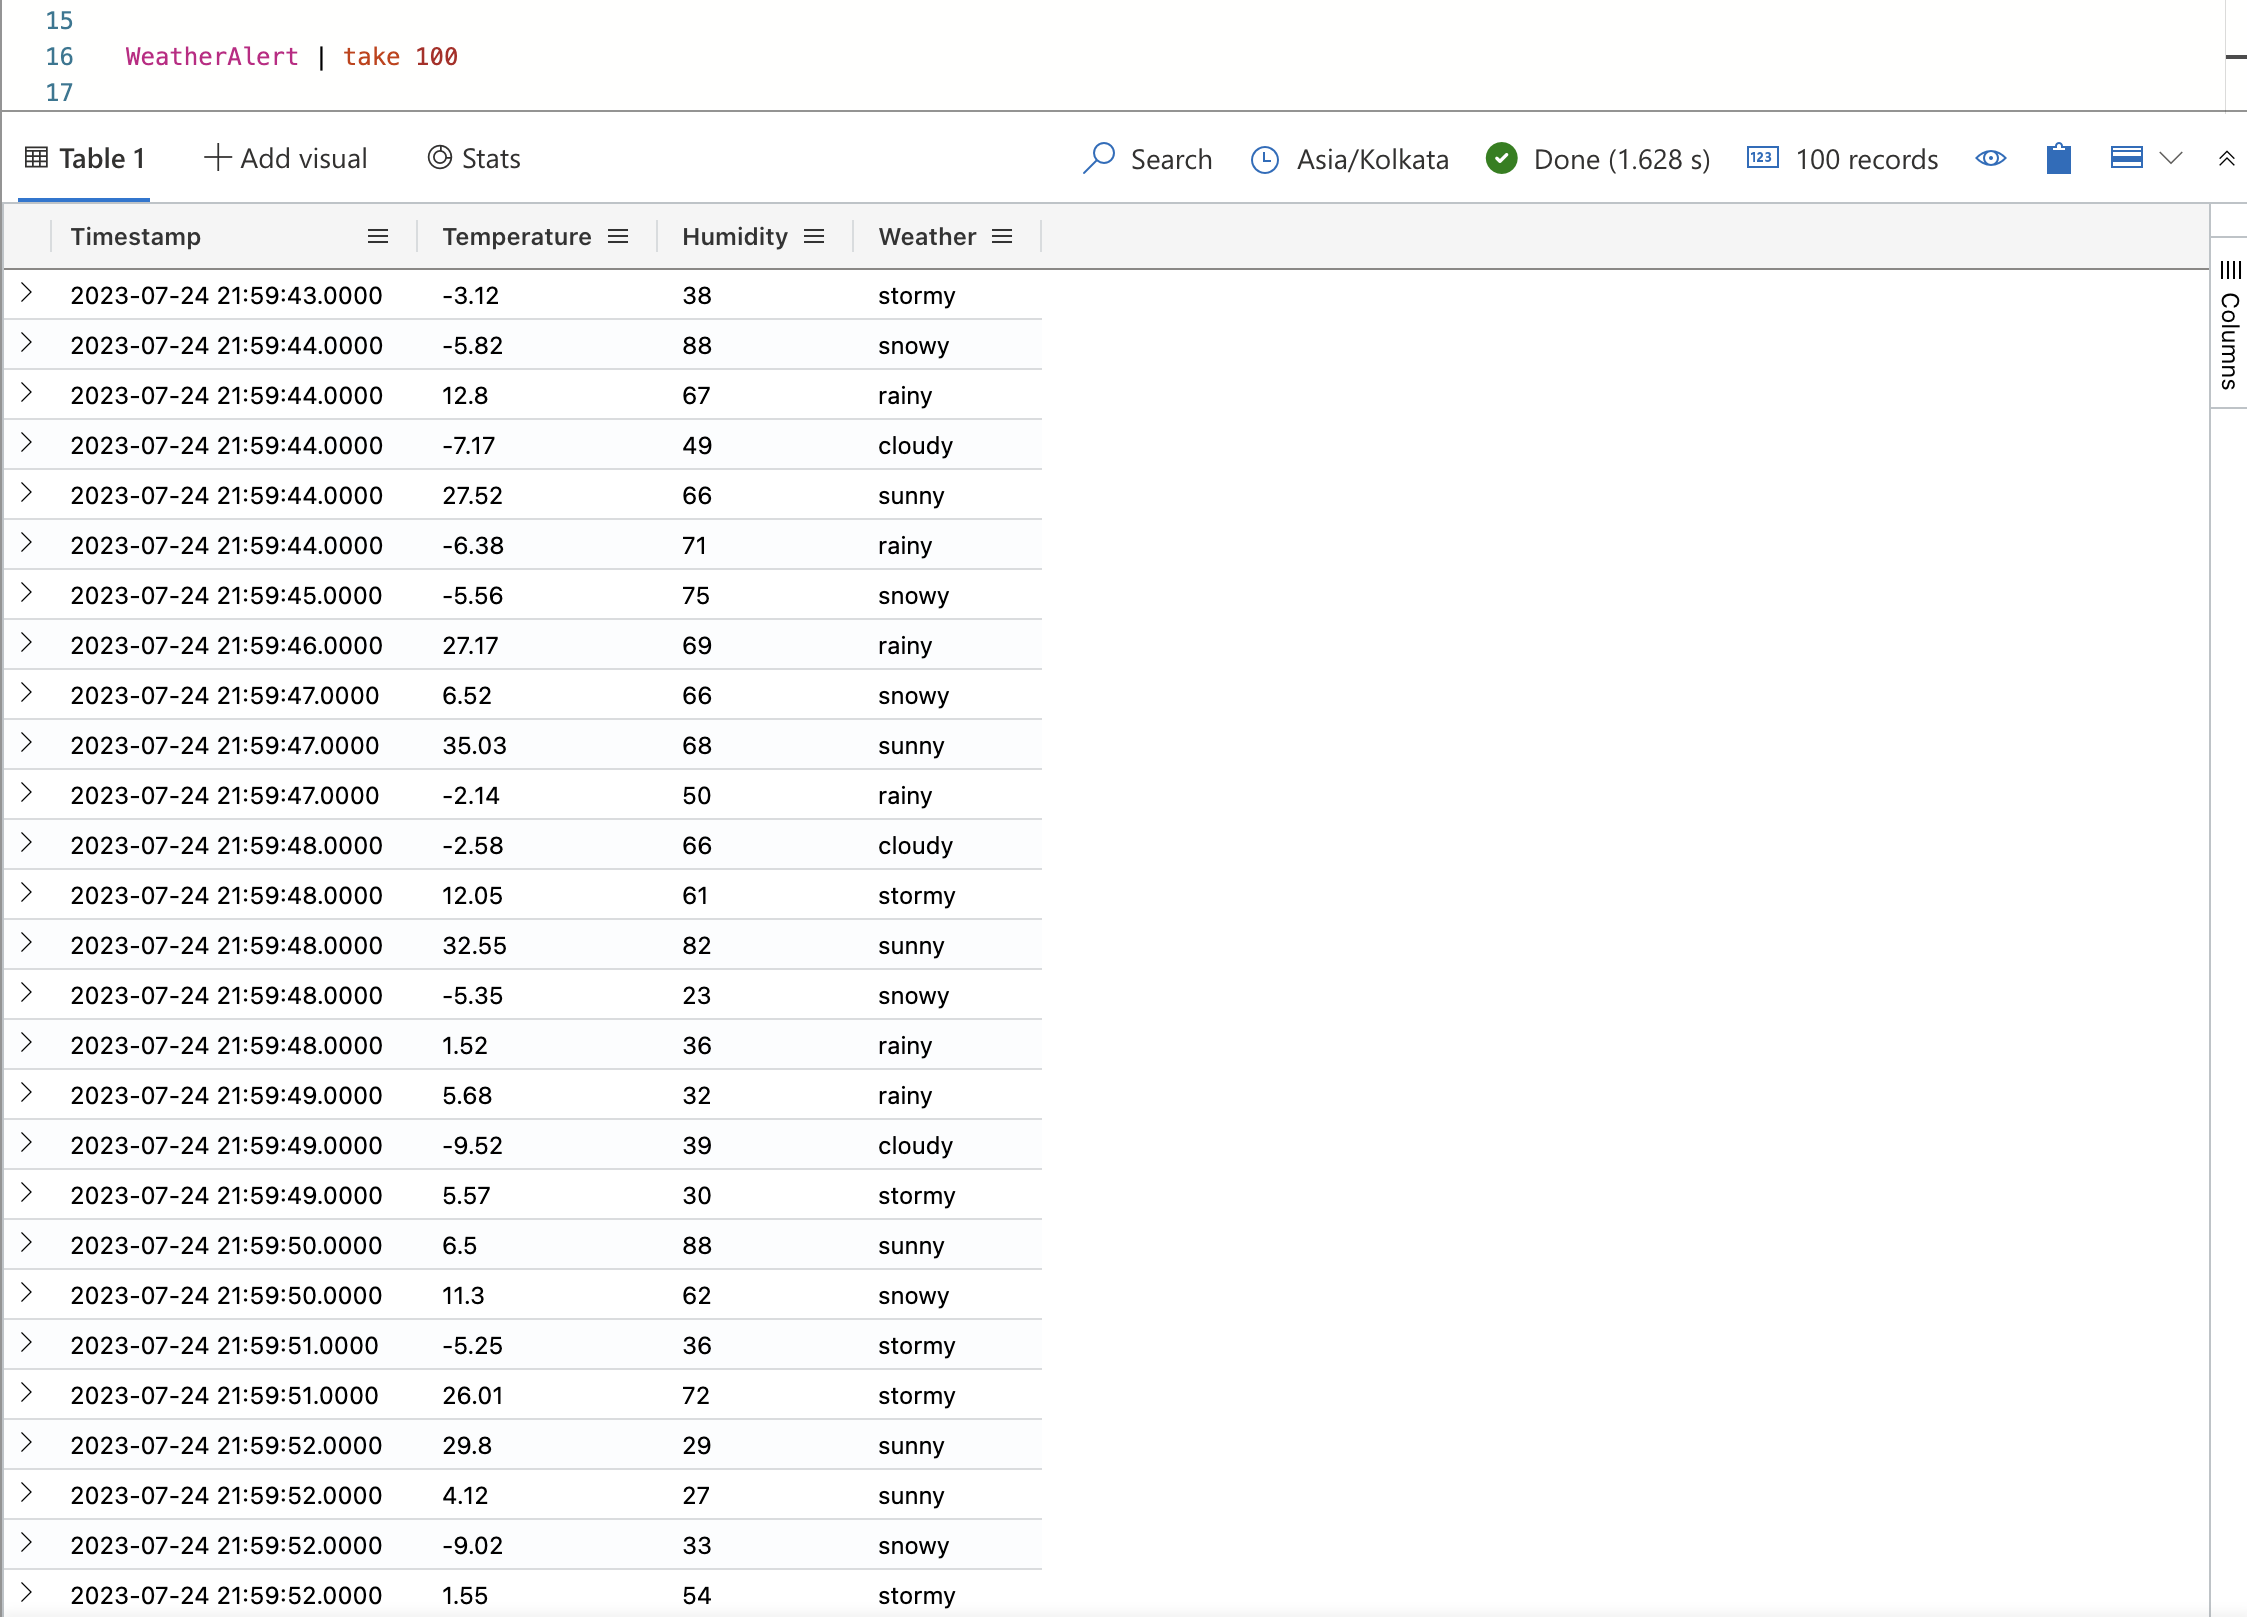 Screenshot of KQL query editor showing the results of a query to get 100 records from the table.